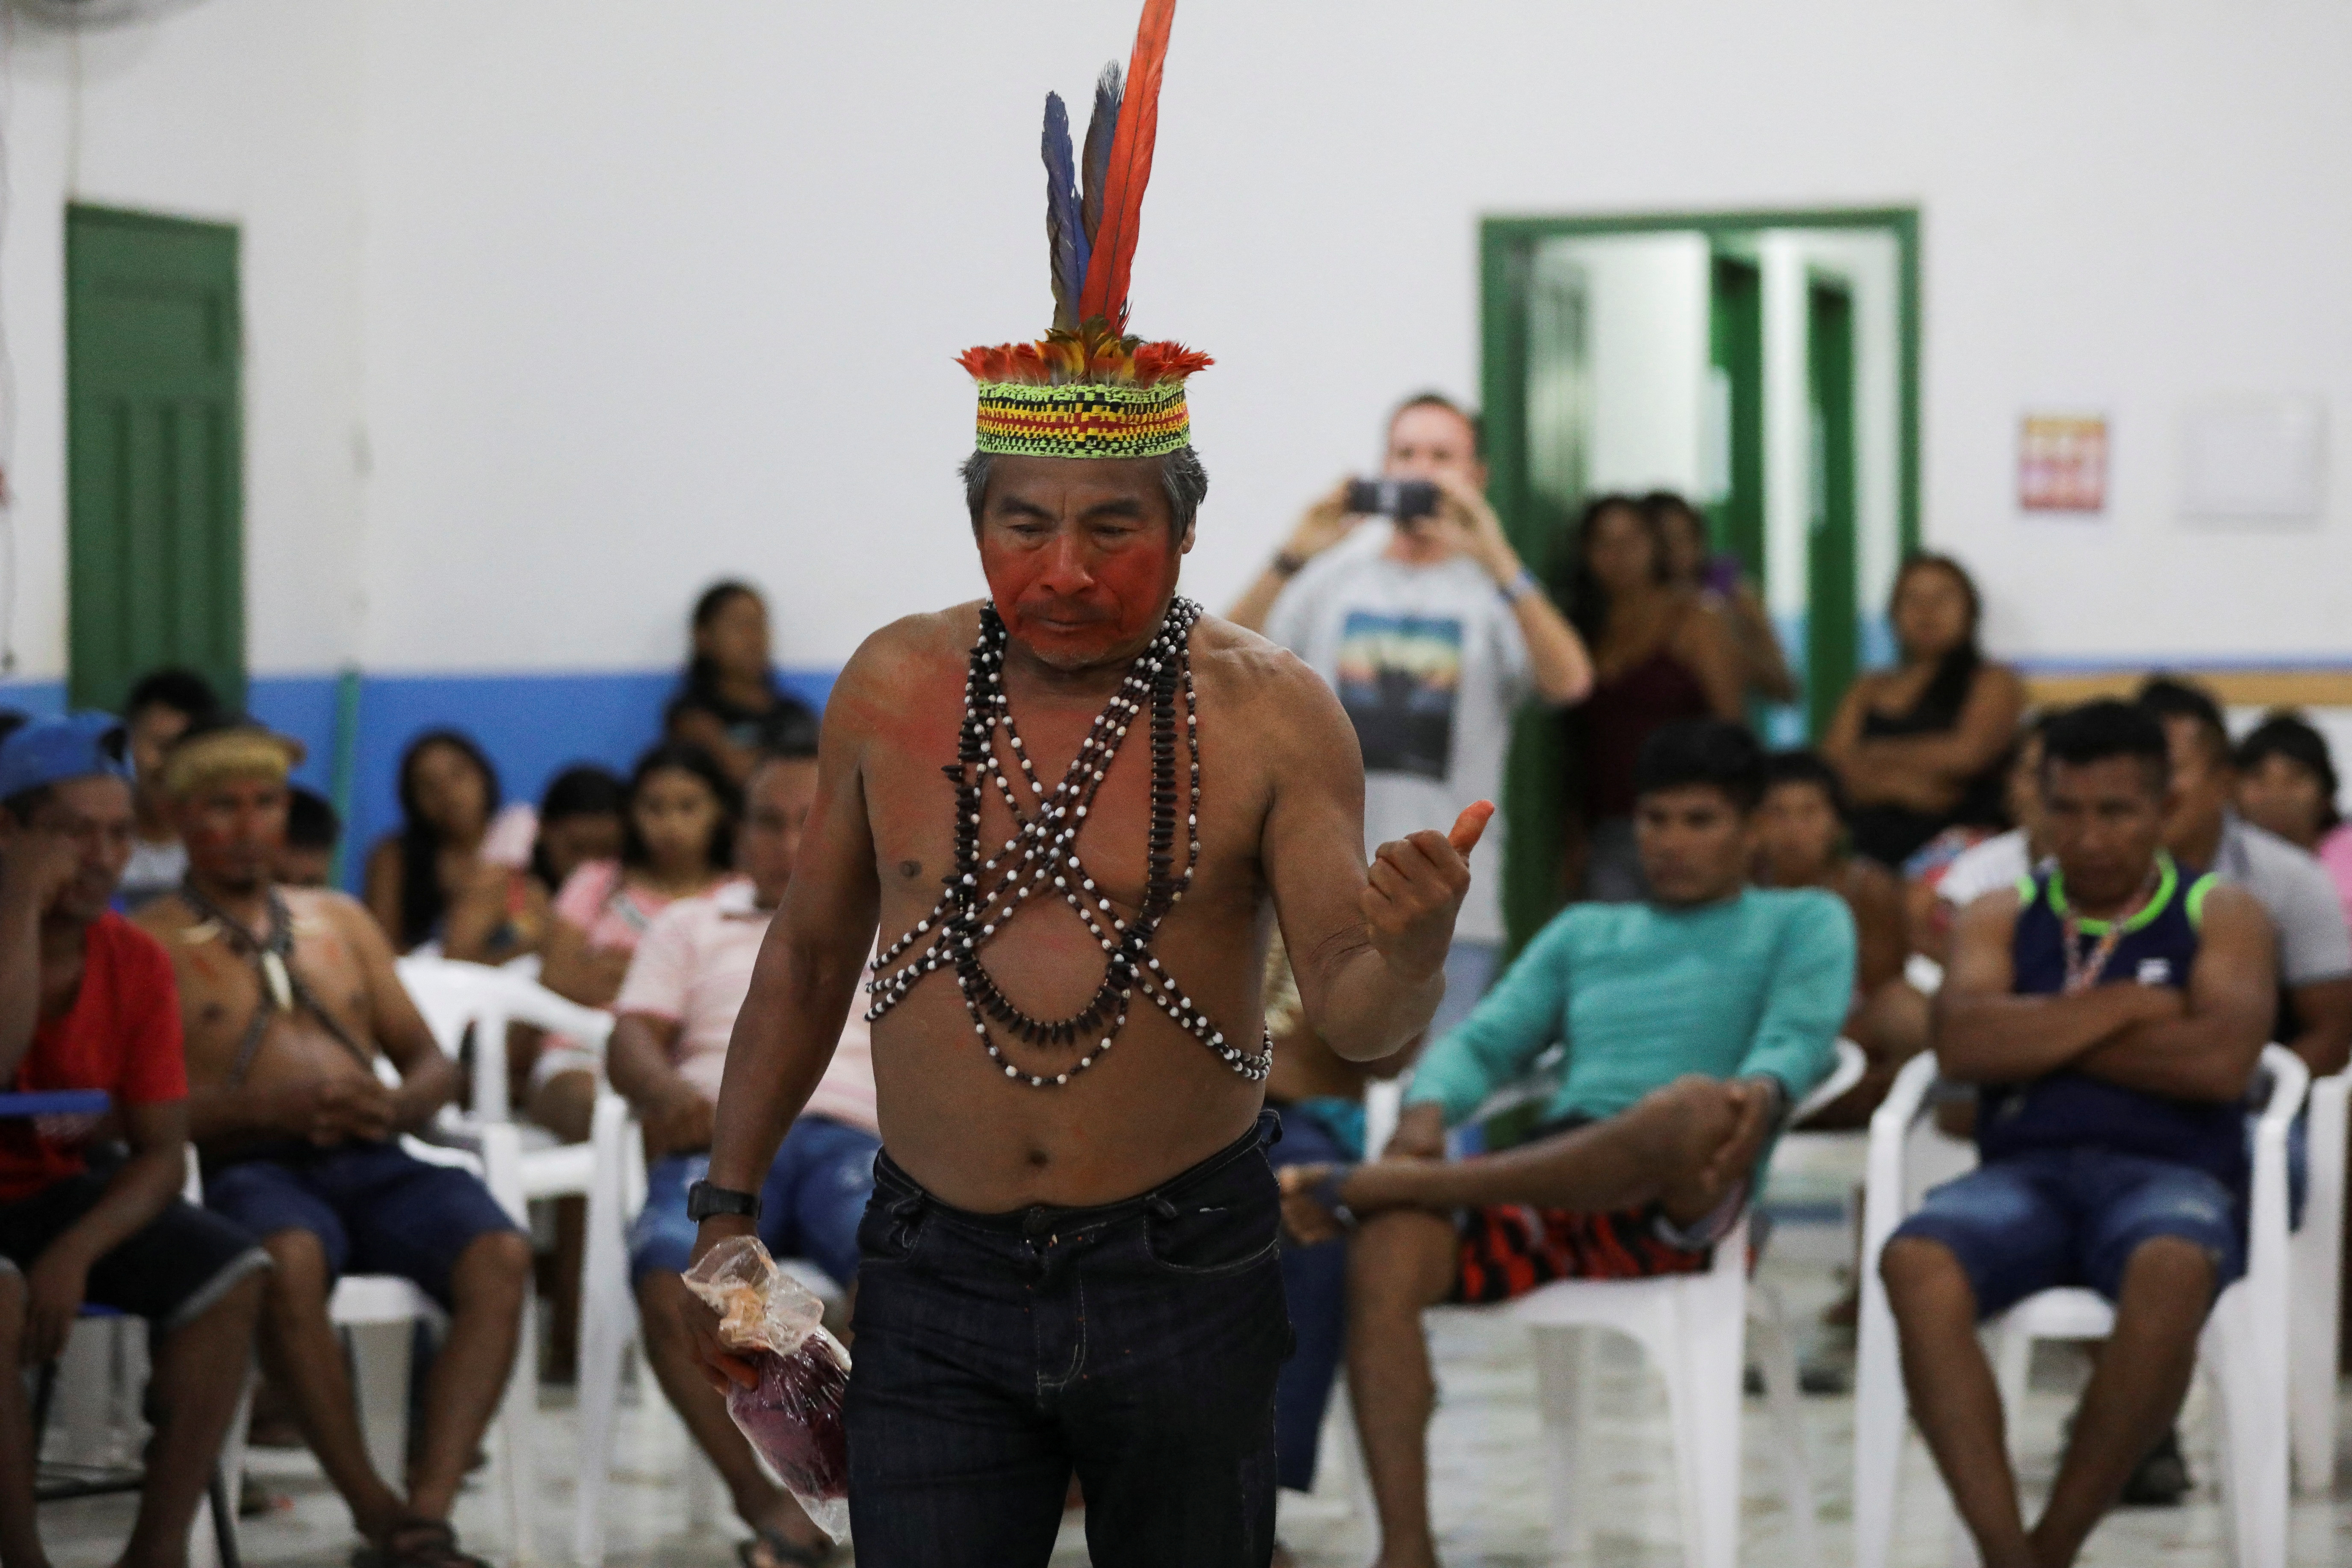 Brazil indigenous defender, sidelined by government, gave life for 